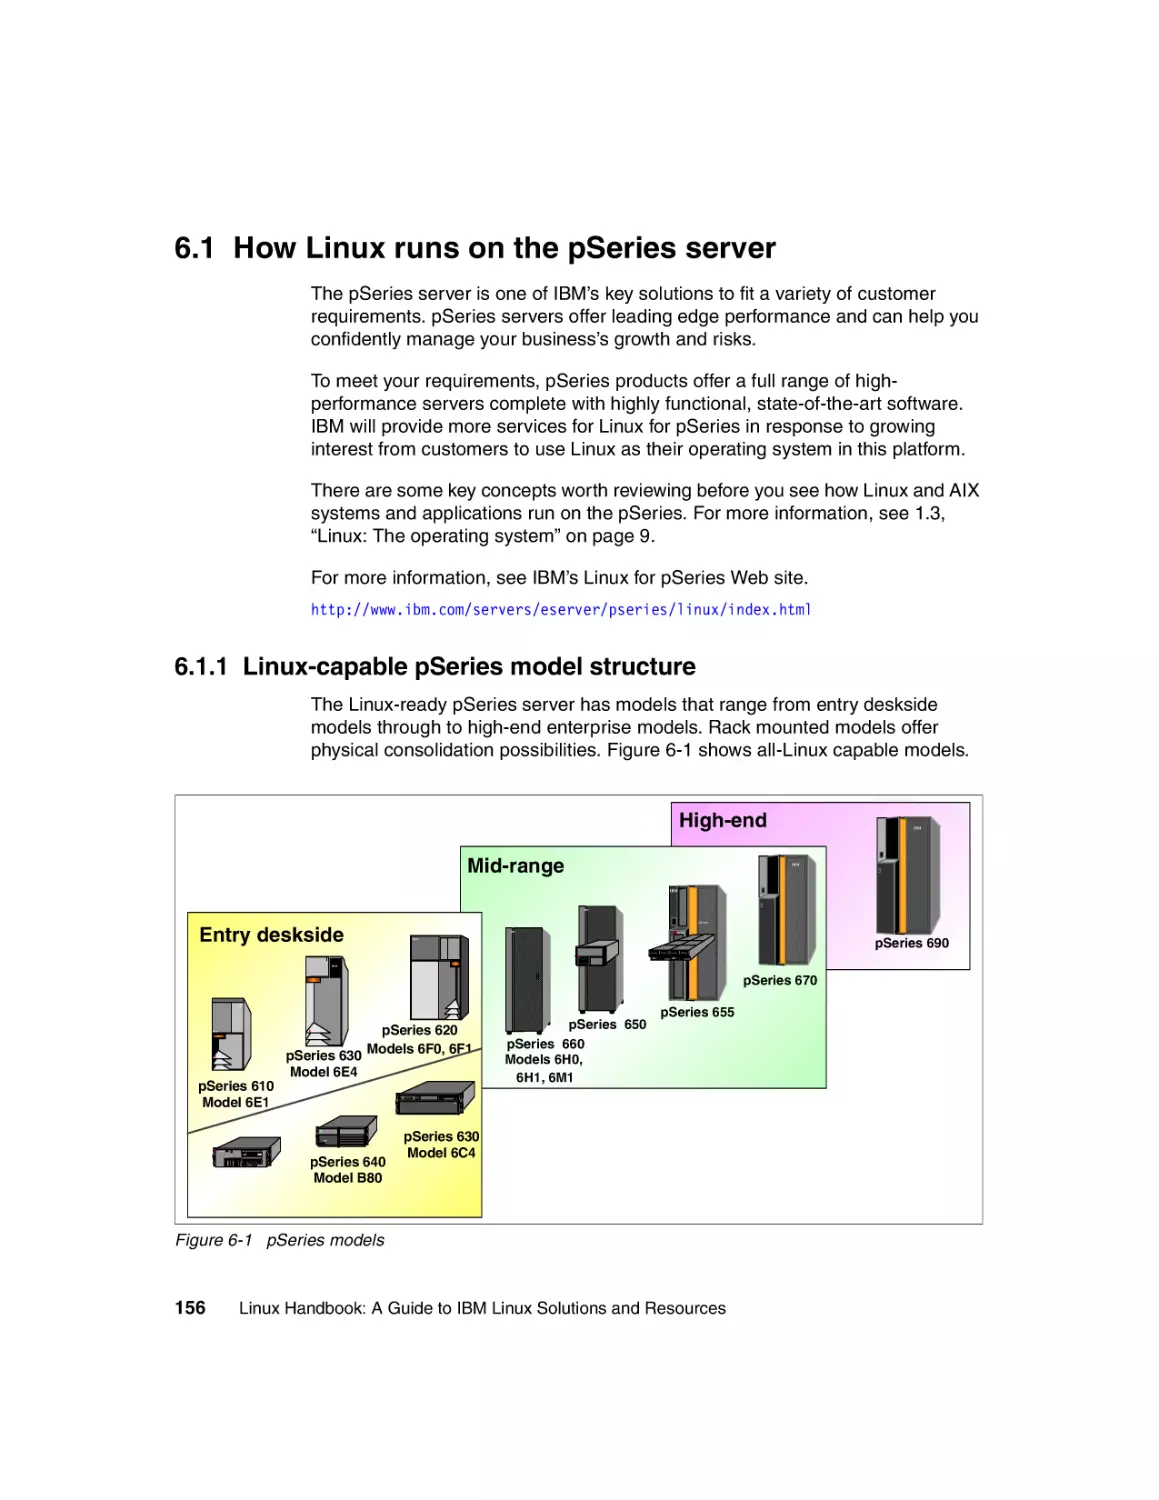 6.1 How Linux runs on the pSeries server
6.1.1 Linux-capable pSeries model structure